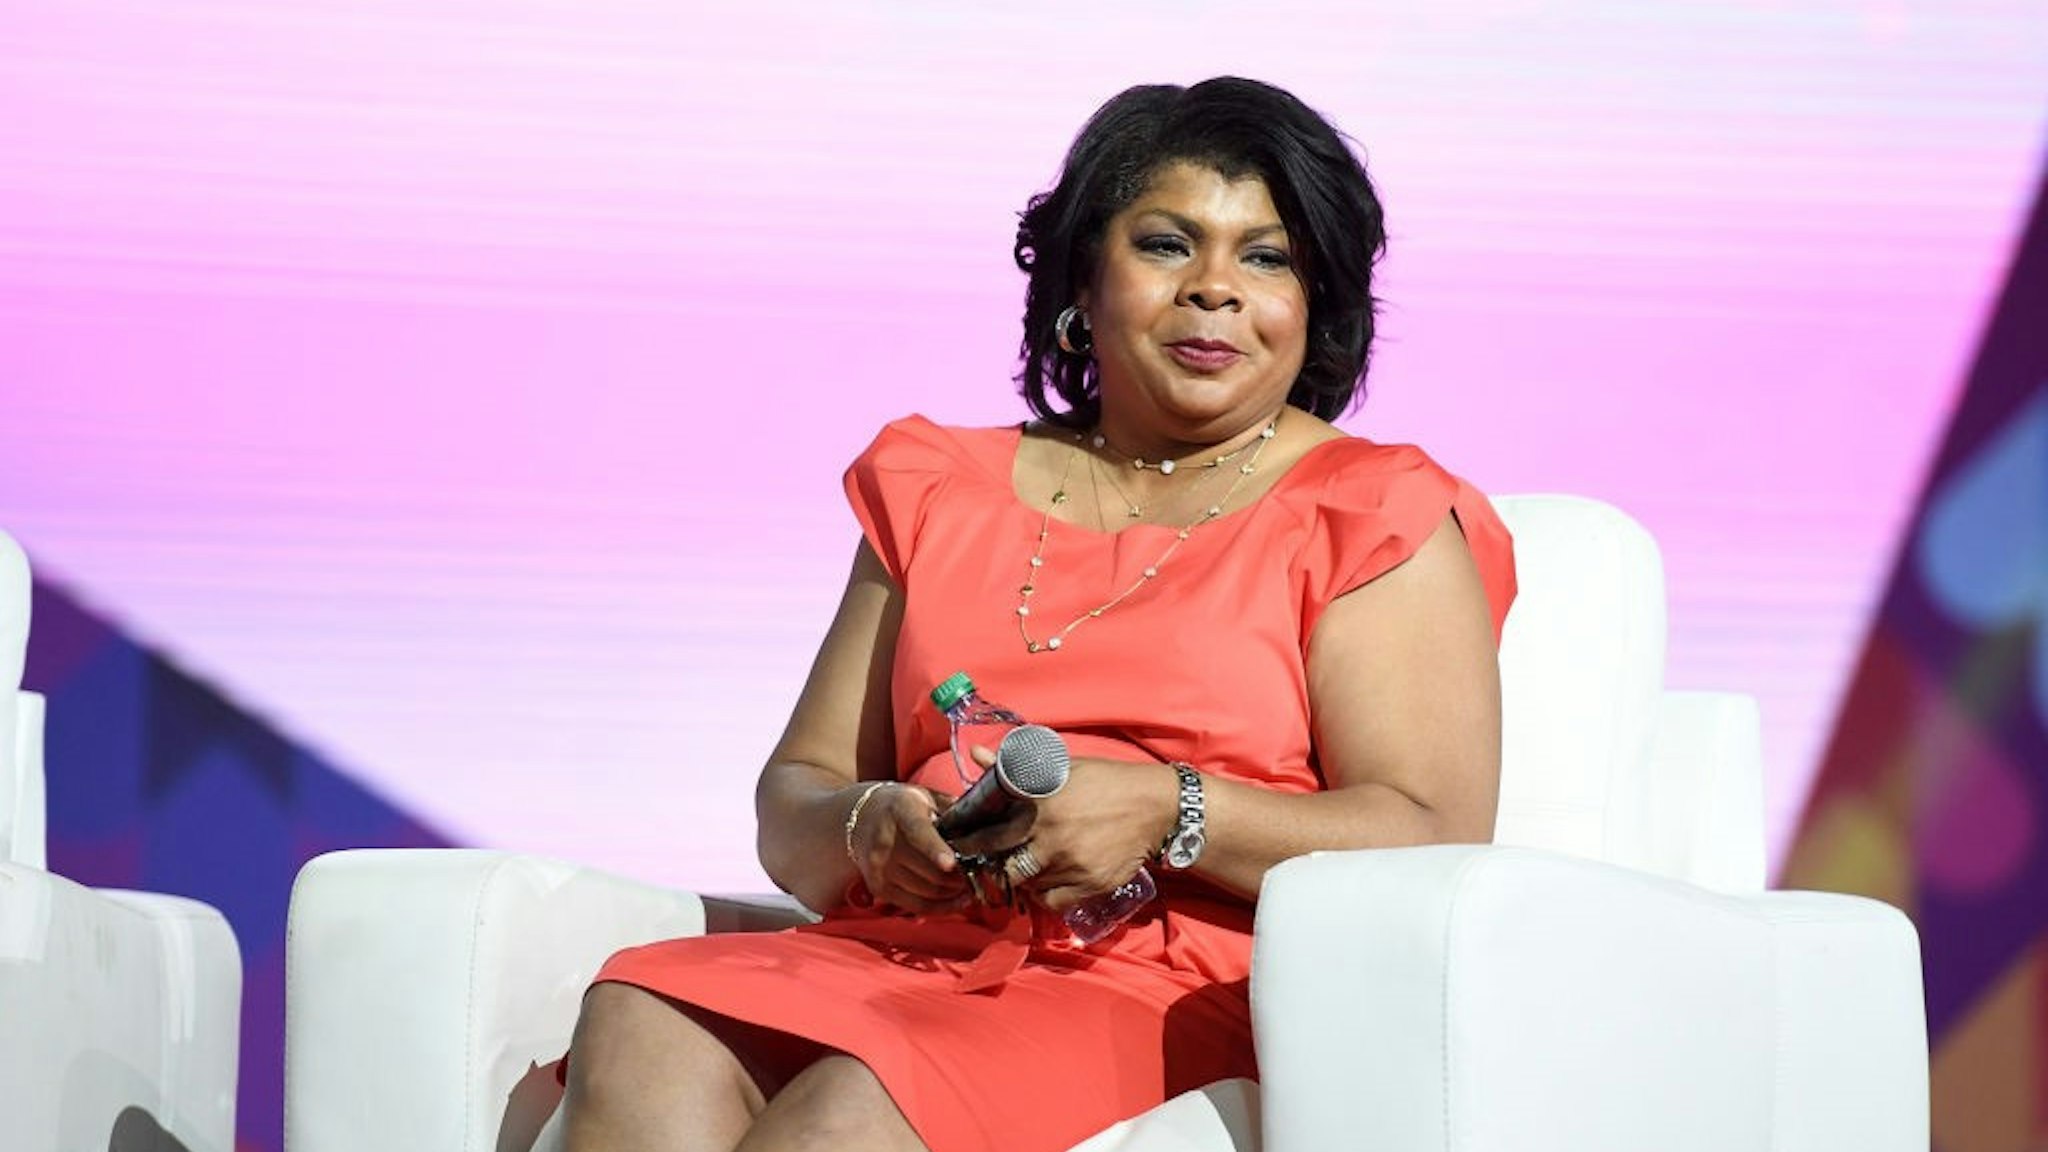 NEW ORLEANS, LA - JUNE 30: April Ryan speaks onstage at the 2017 ESSENCE Festival presented by Coca-Cola at Ernest N. Morial Convention Center on June 30, 2017 in New Orleans, Louisiana.